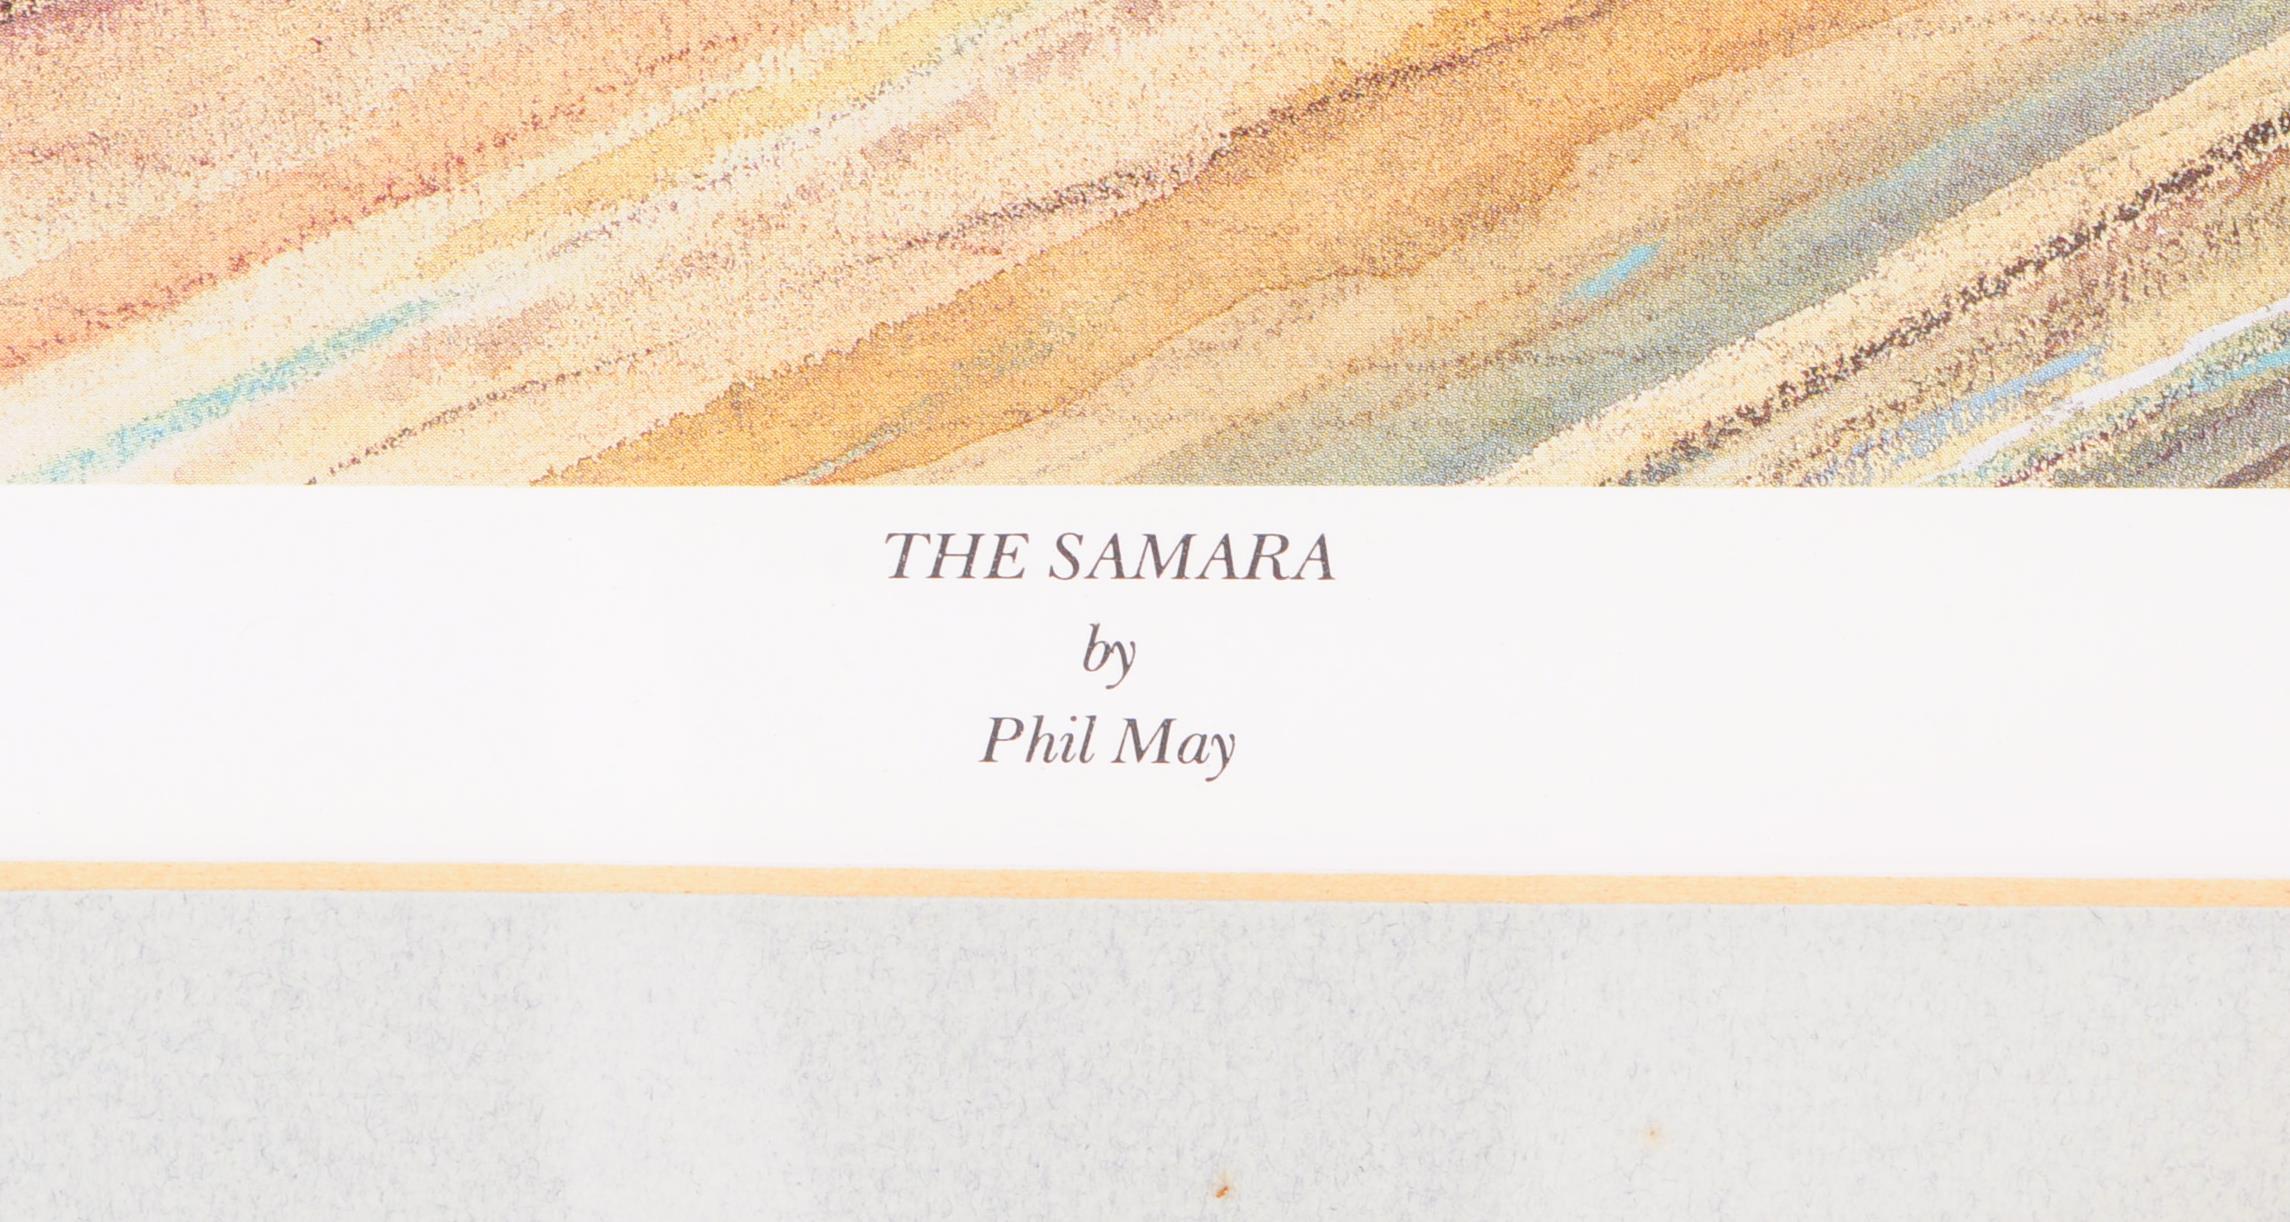 THE SAMARA BY PHIL MAY - LIMITED EDITION SIGNED PRINT - Image 3 of 5